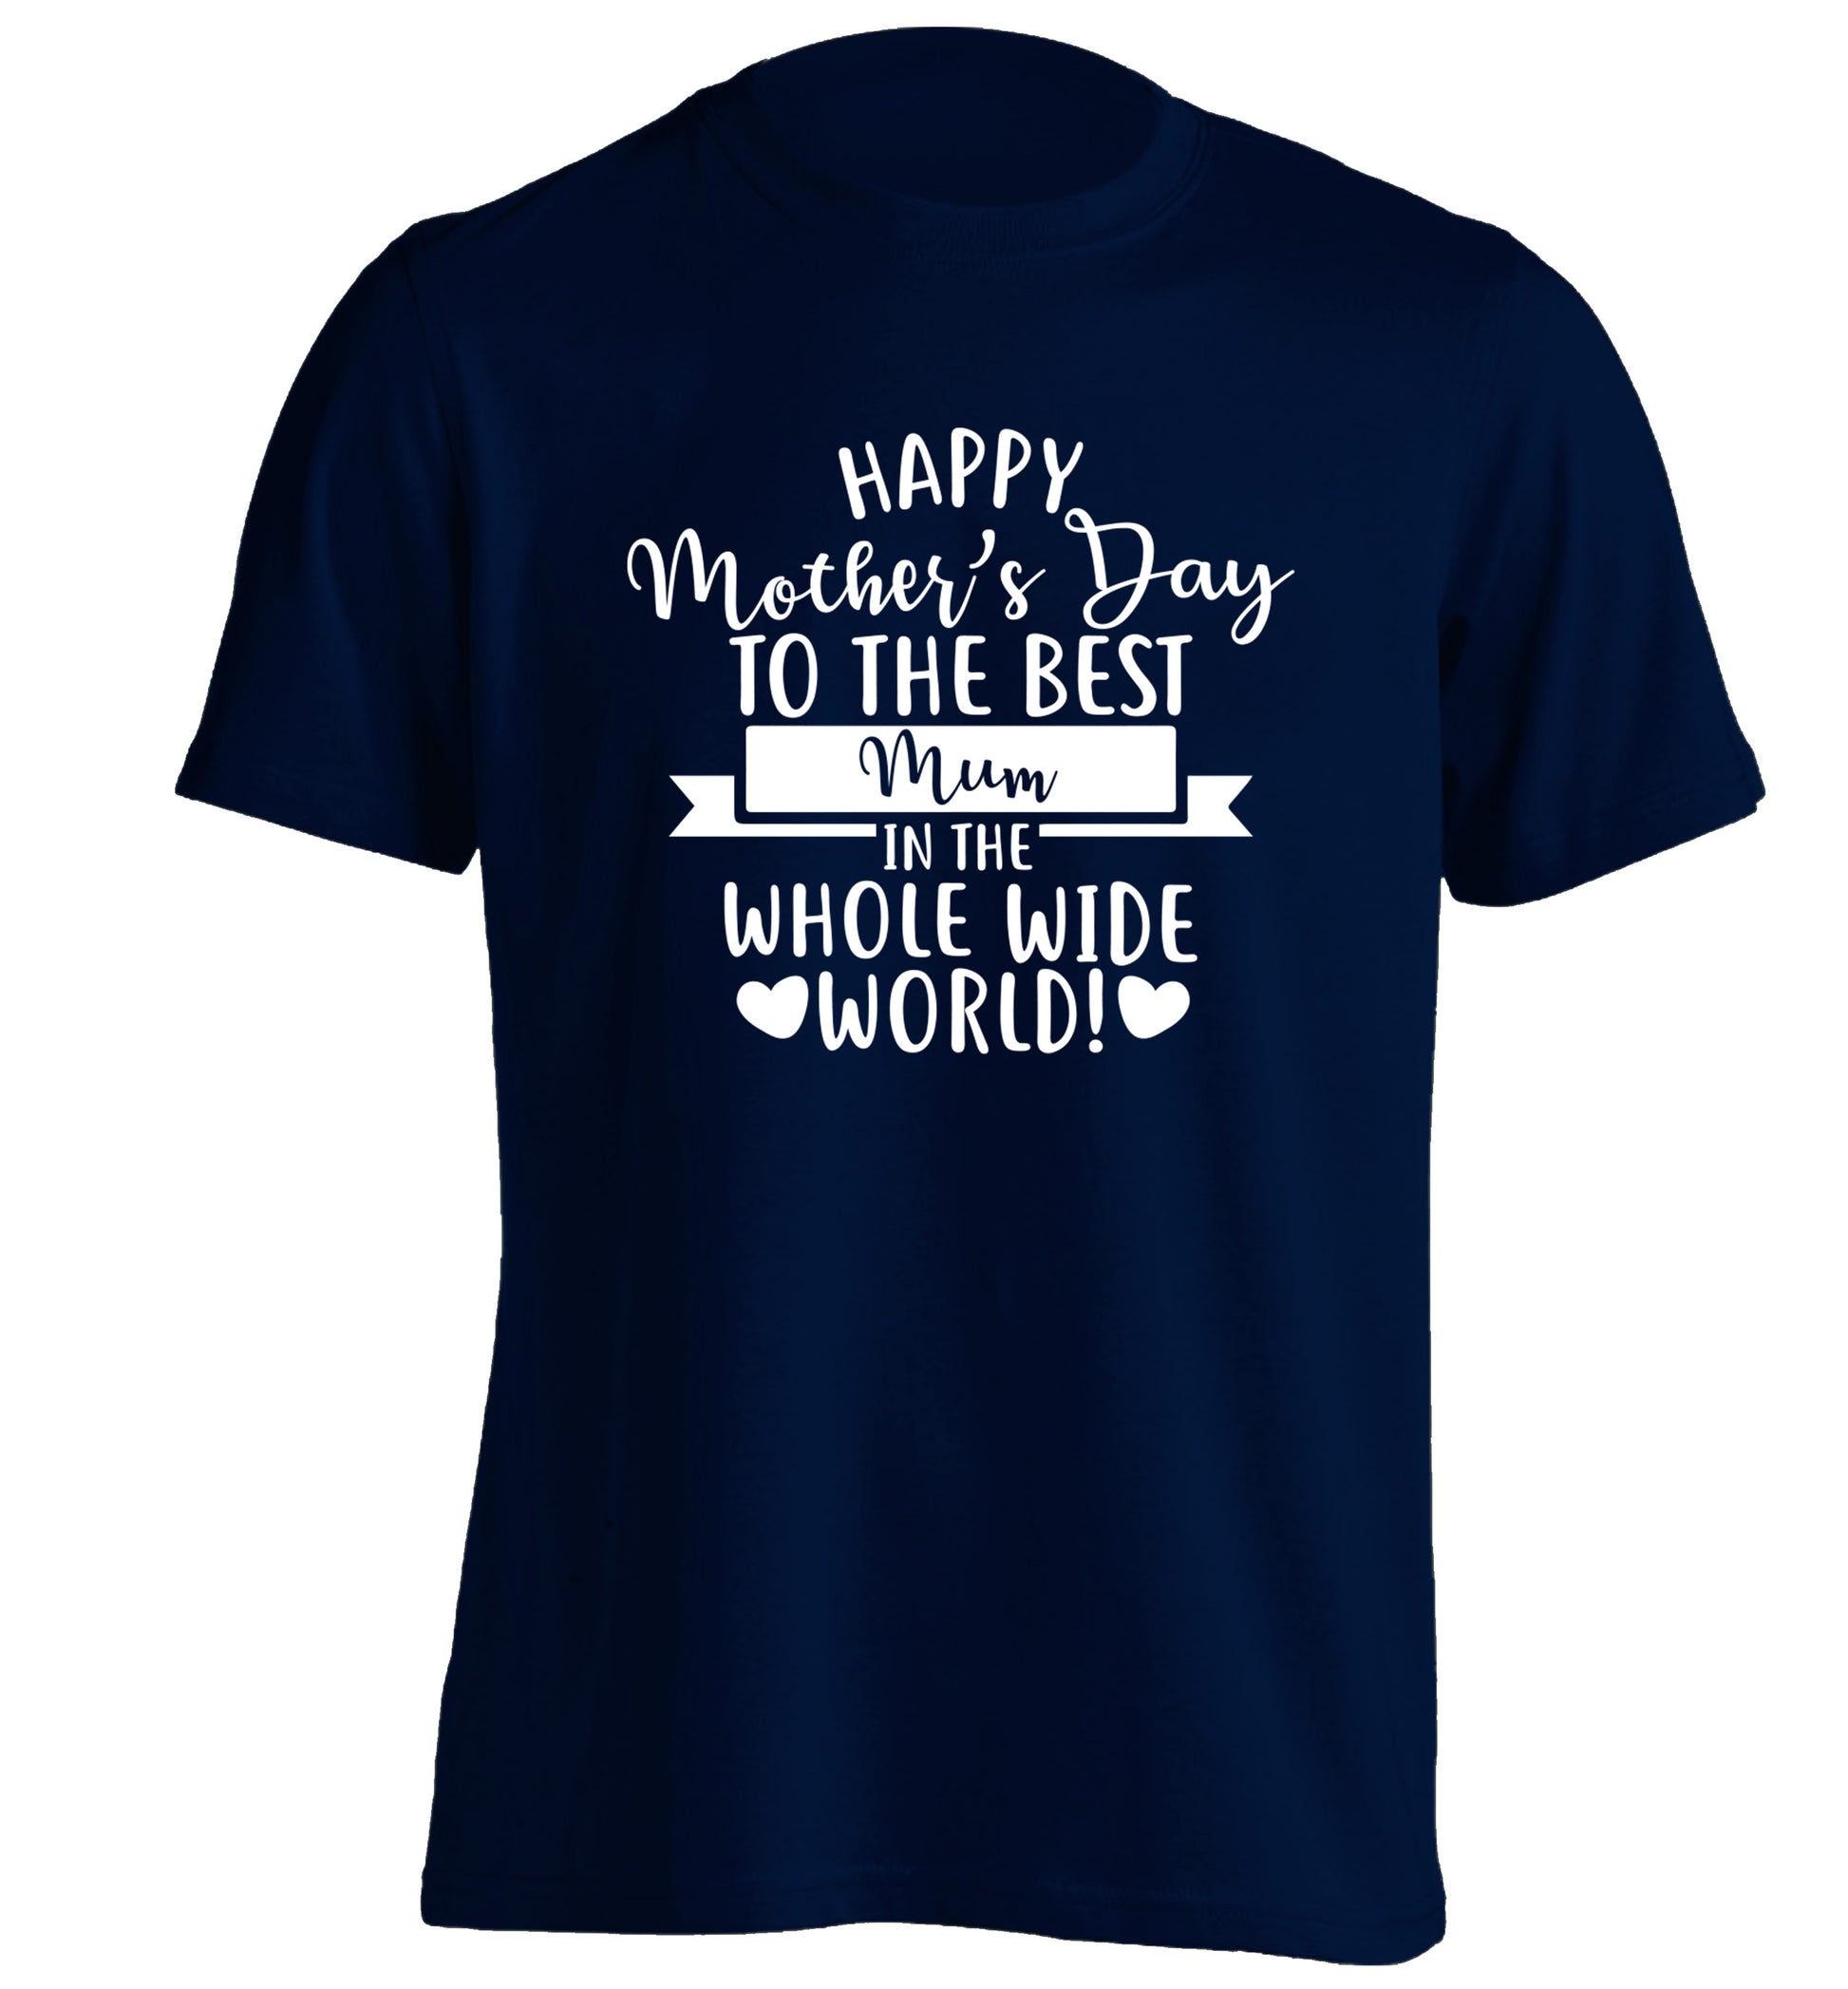 Happy Mother's Day to the best mum in the whole wide world! adults unisex navy Tshirt 2XL